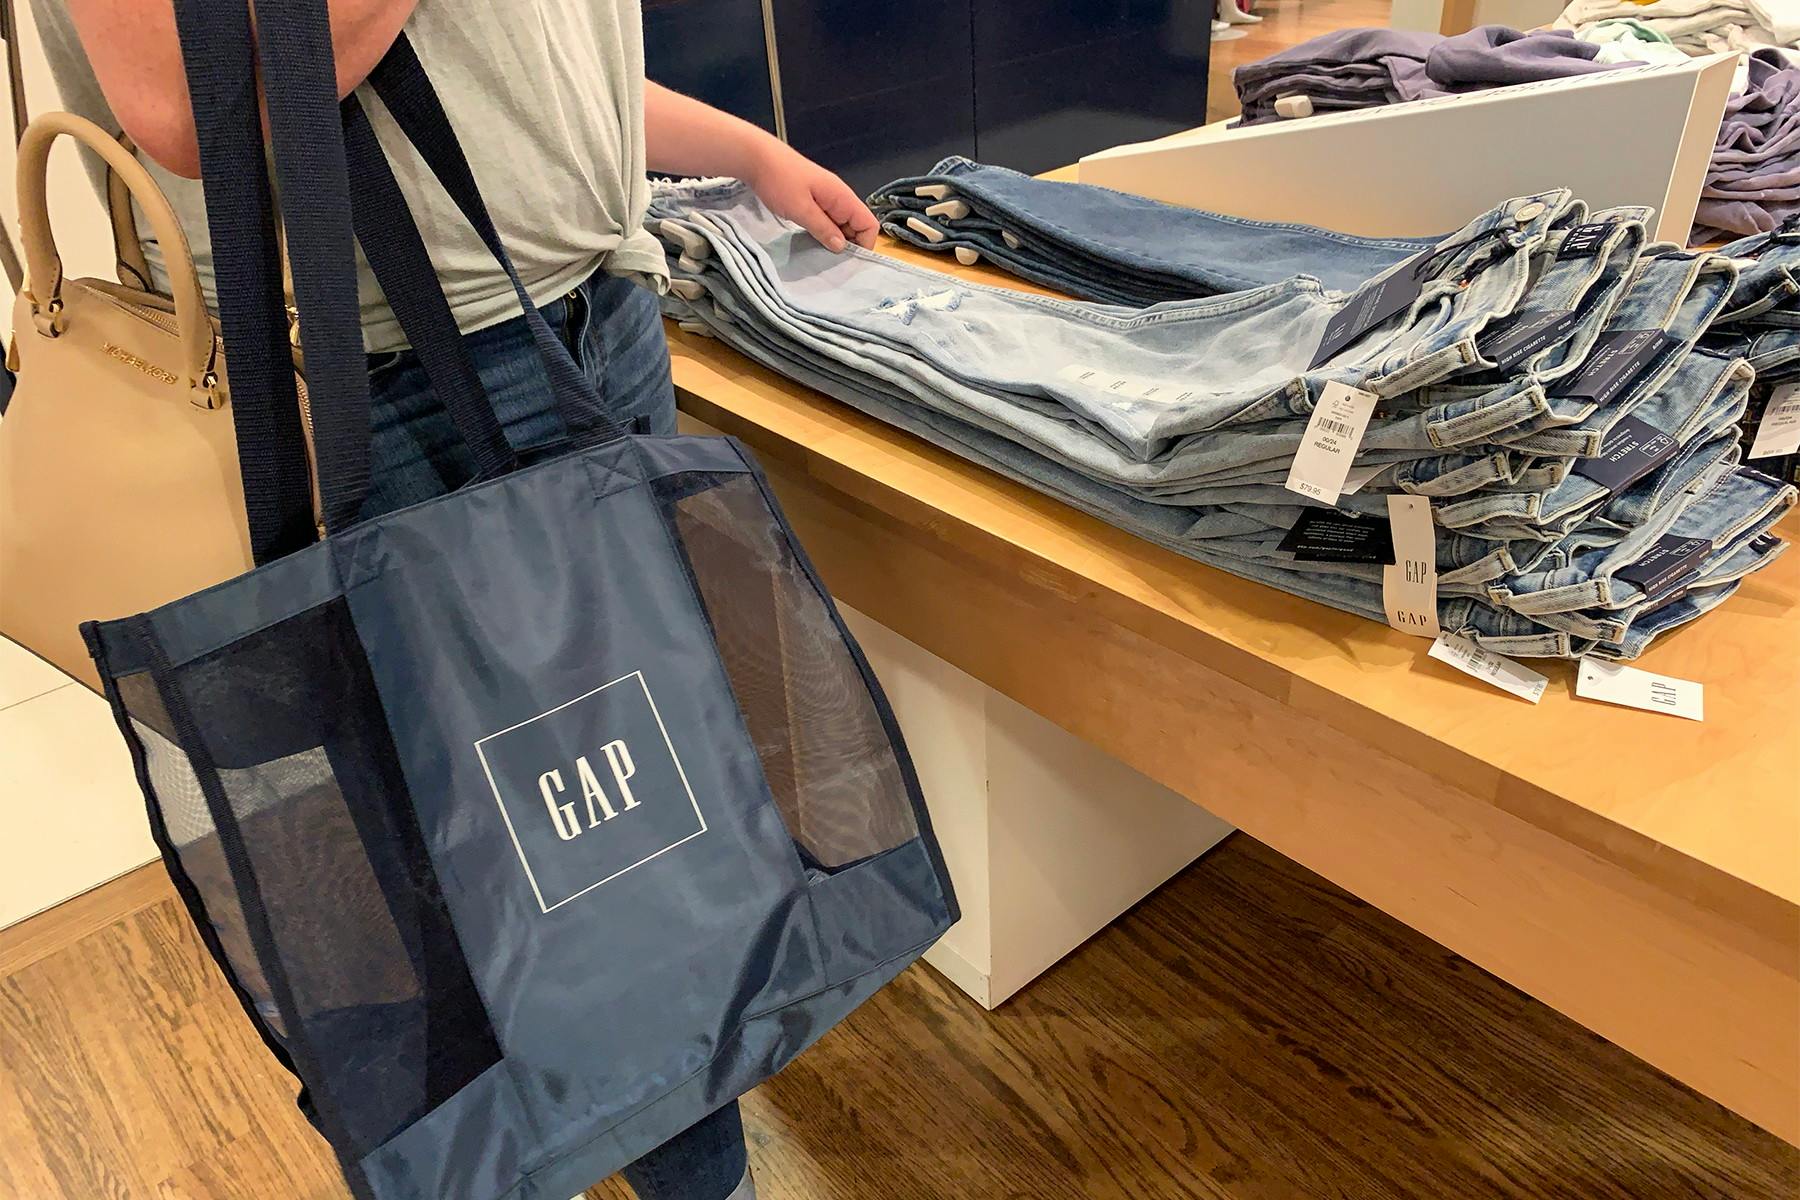 Someone carrying a GAP shopping bag and looking at jeans on a table in a GAP store